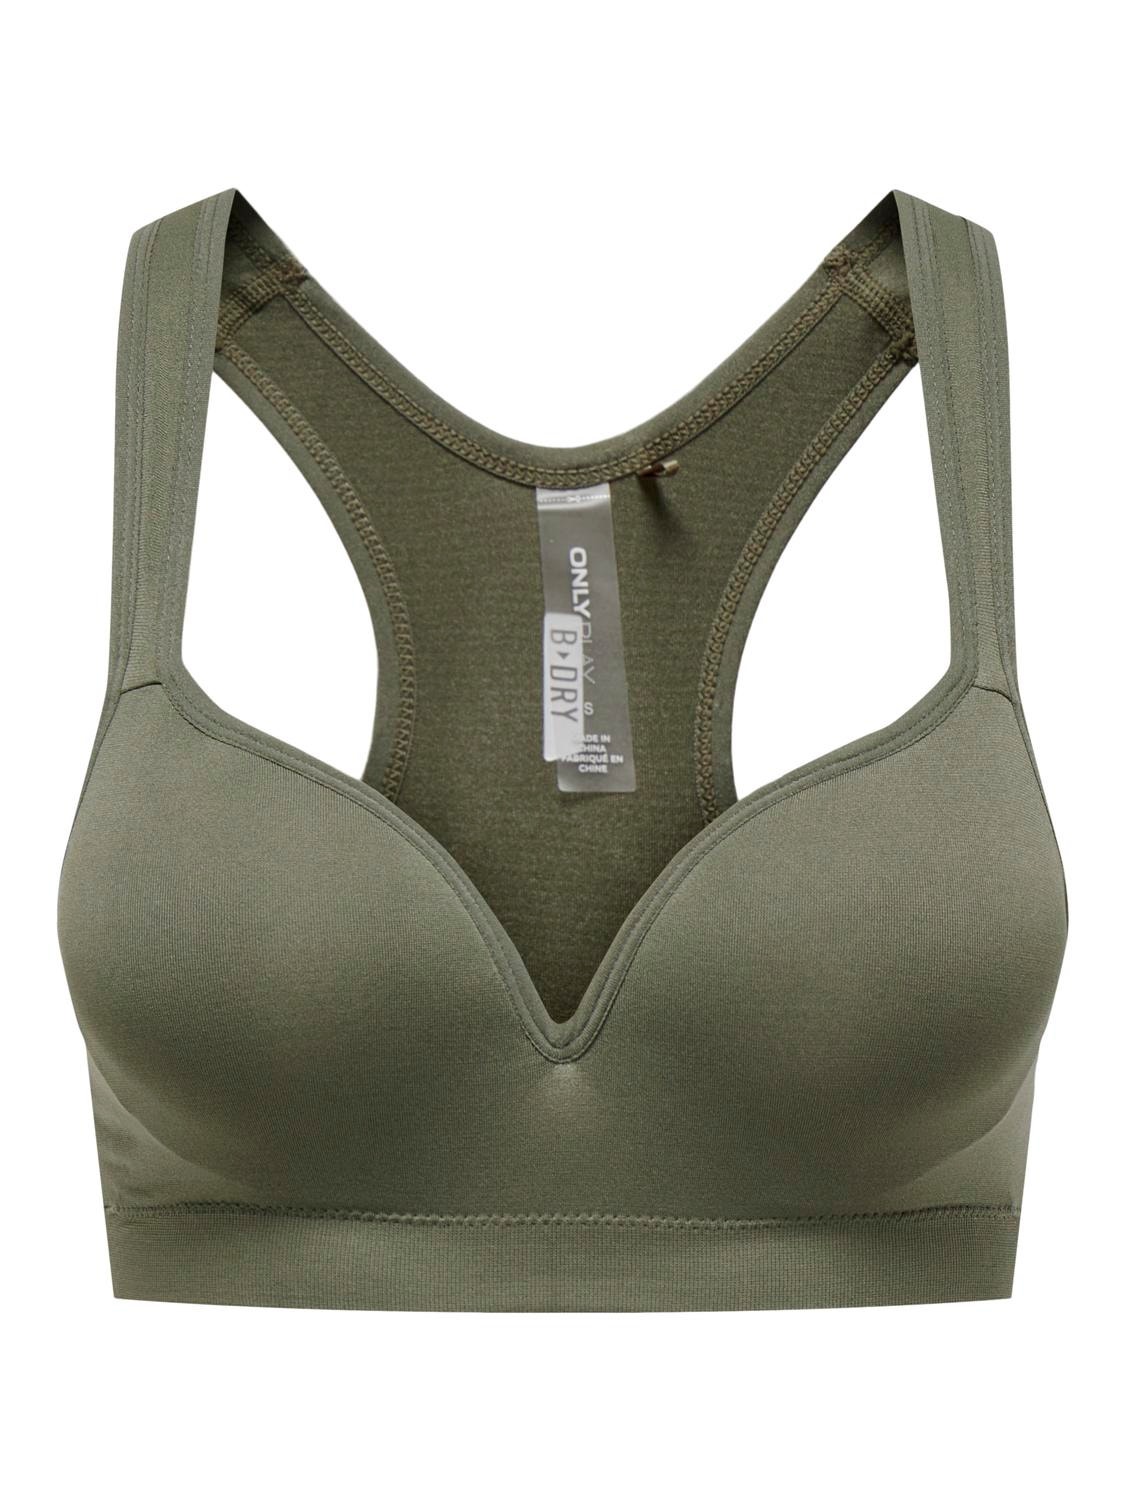 ONLY Naadloze Sport BH -Dusty Olive - 15132244